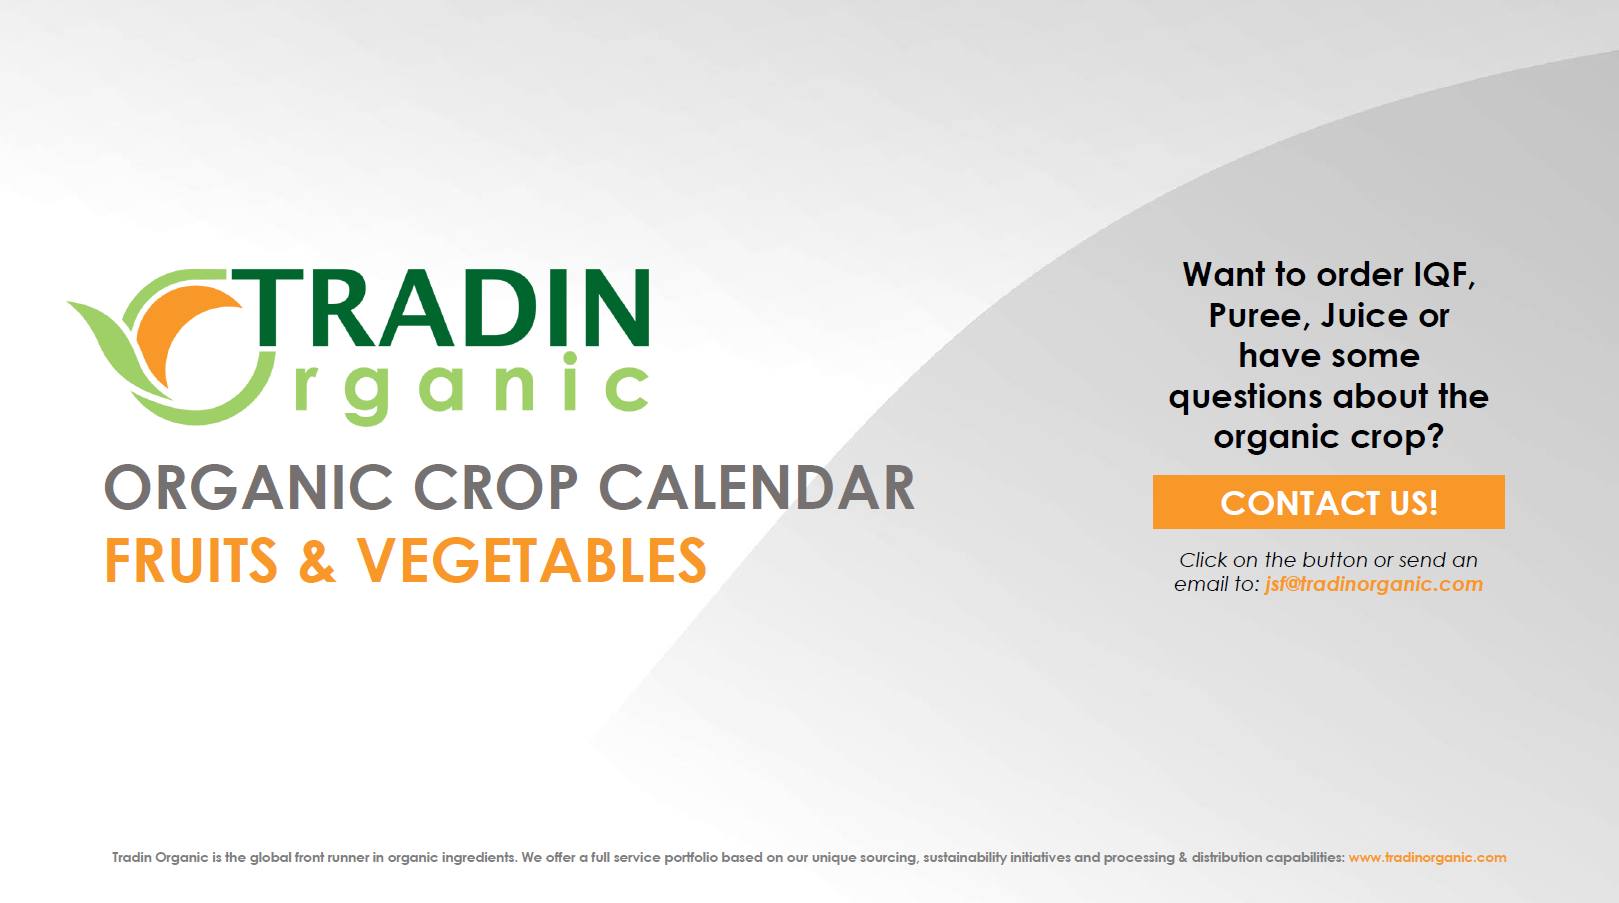 Tradin Organic Launches the Organic Crop Calendar for fruits and vegetables